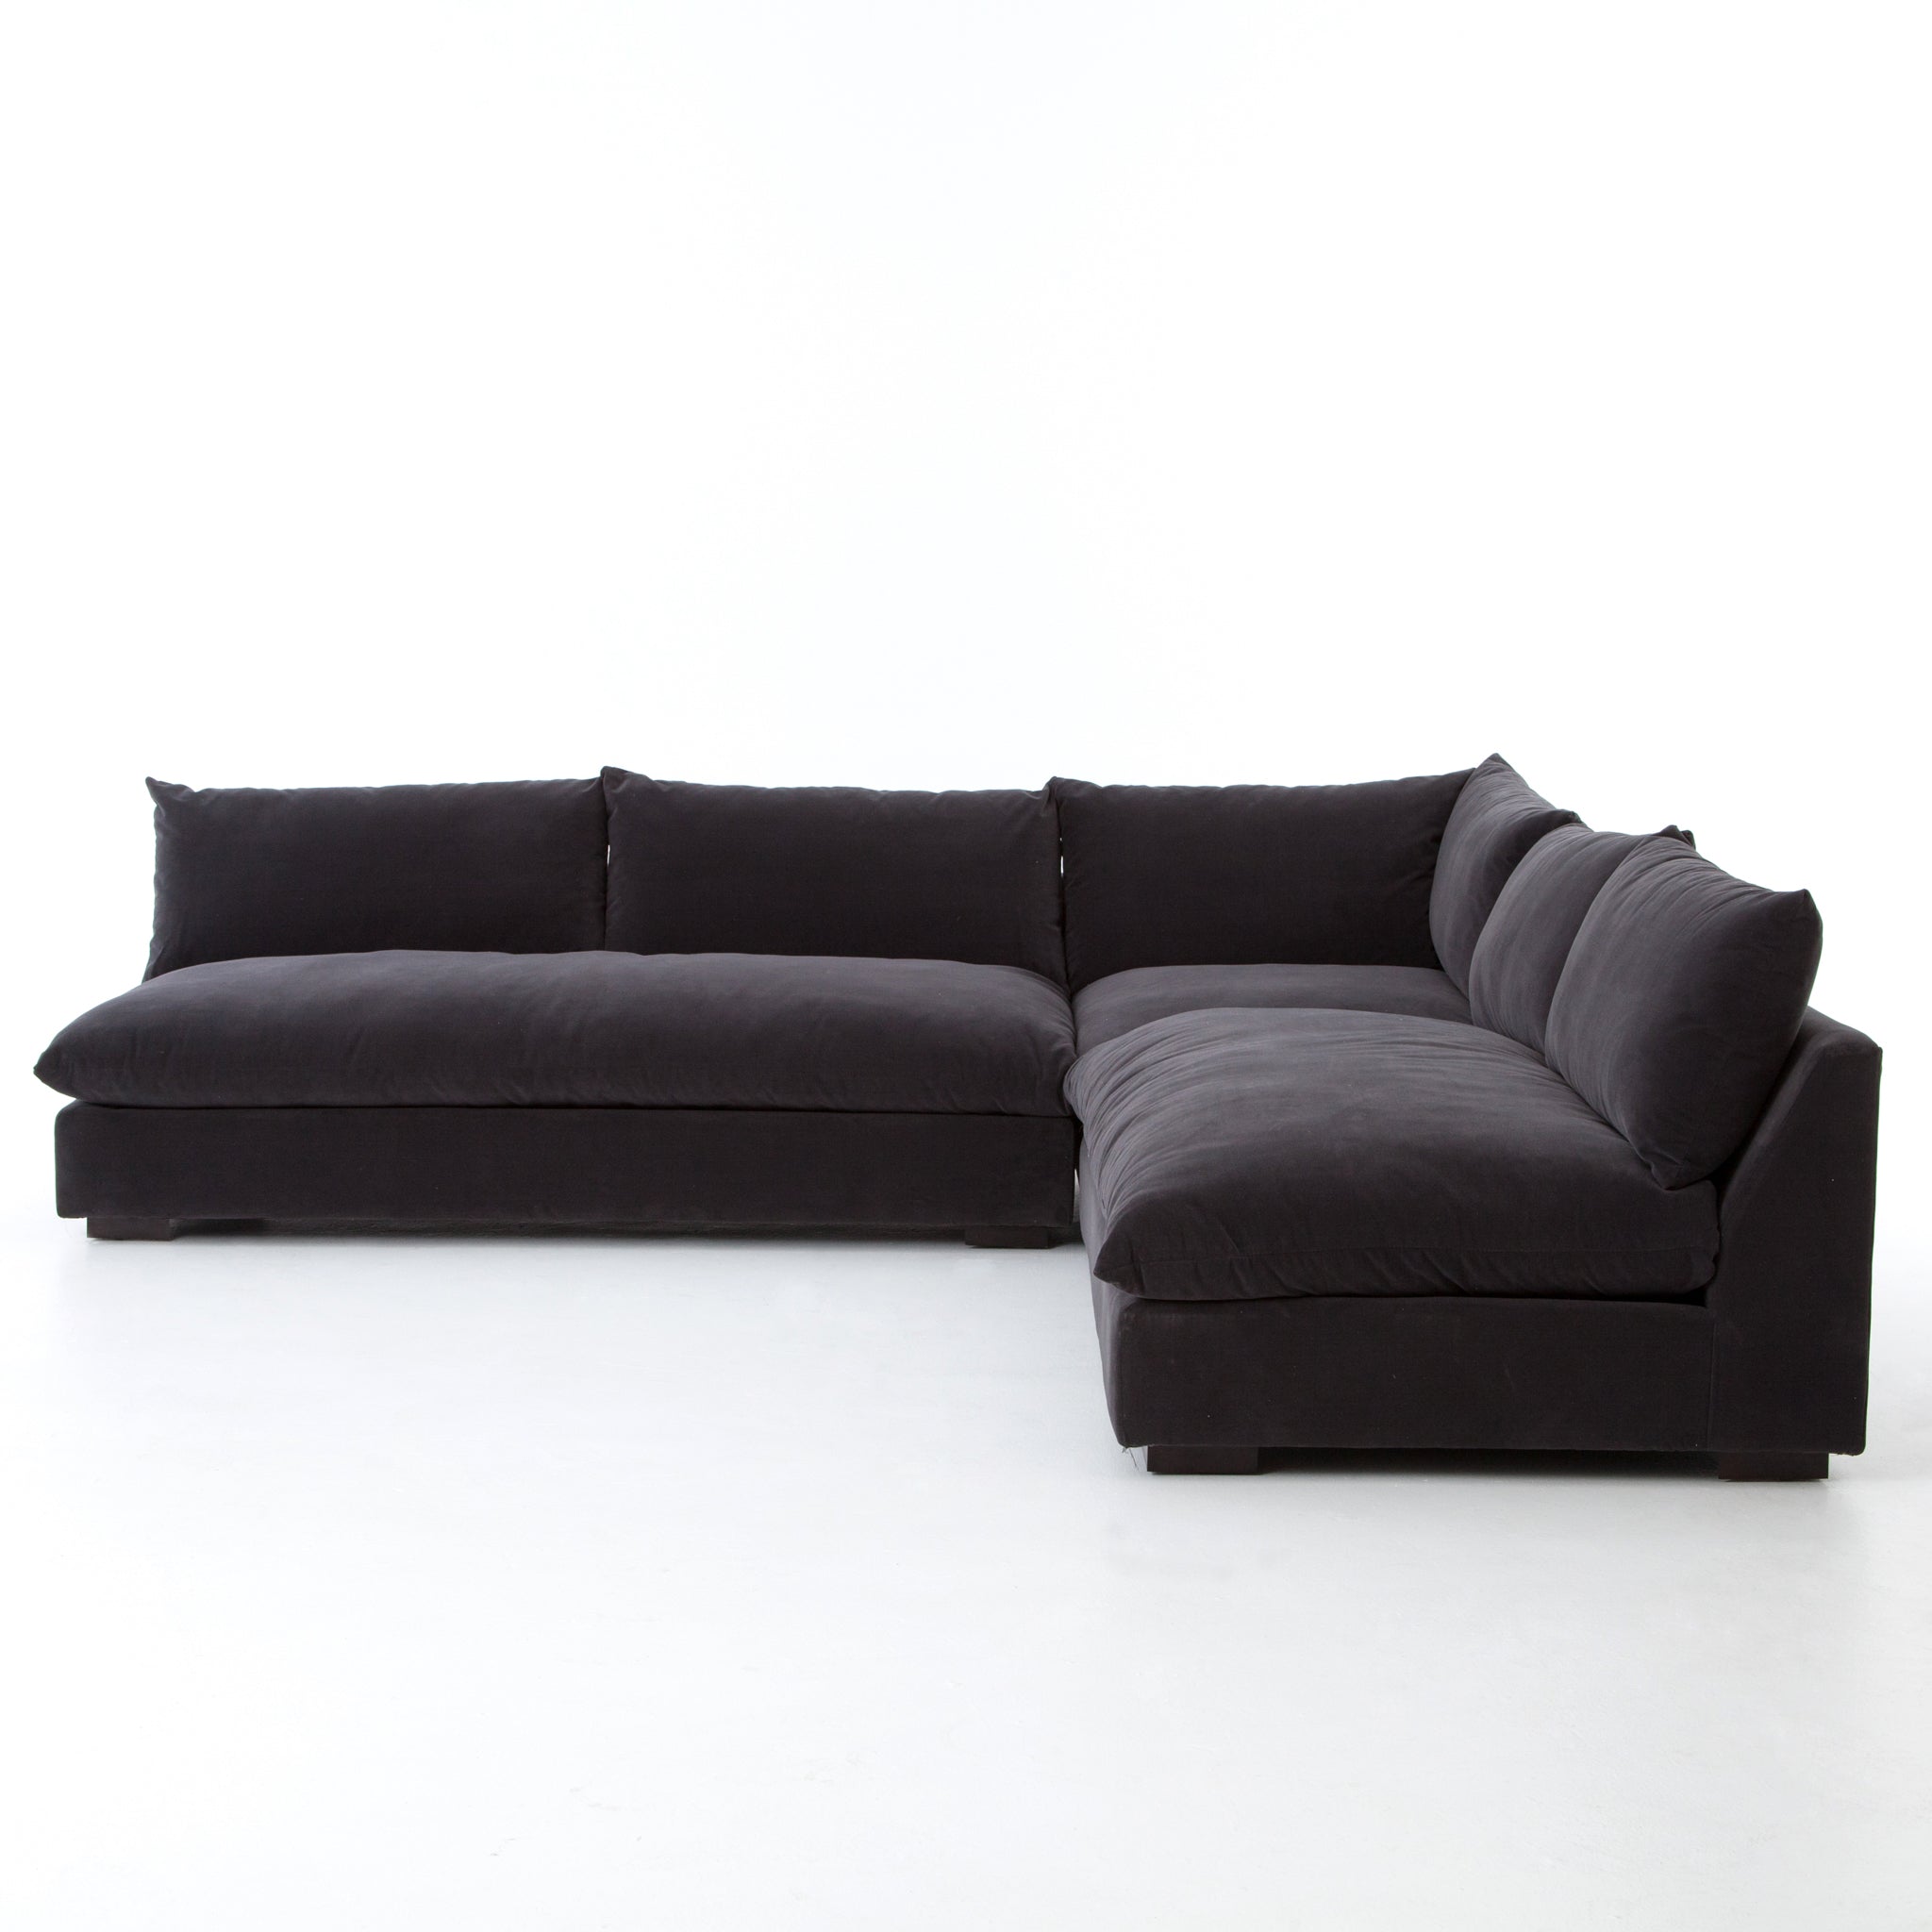 Grant 3-Piece Sectional